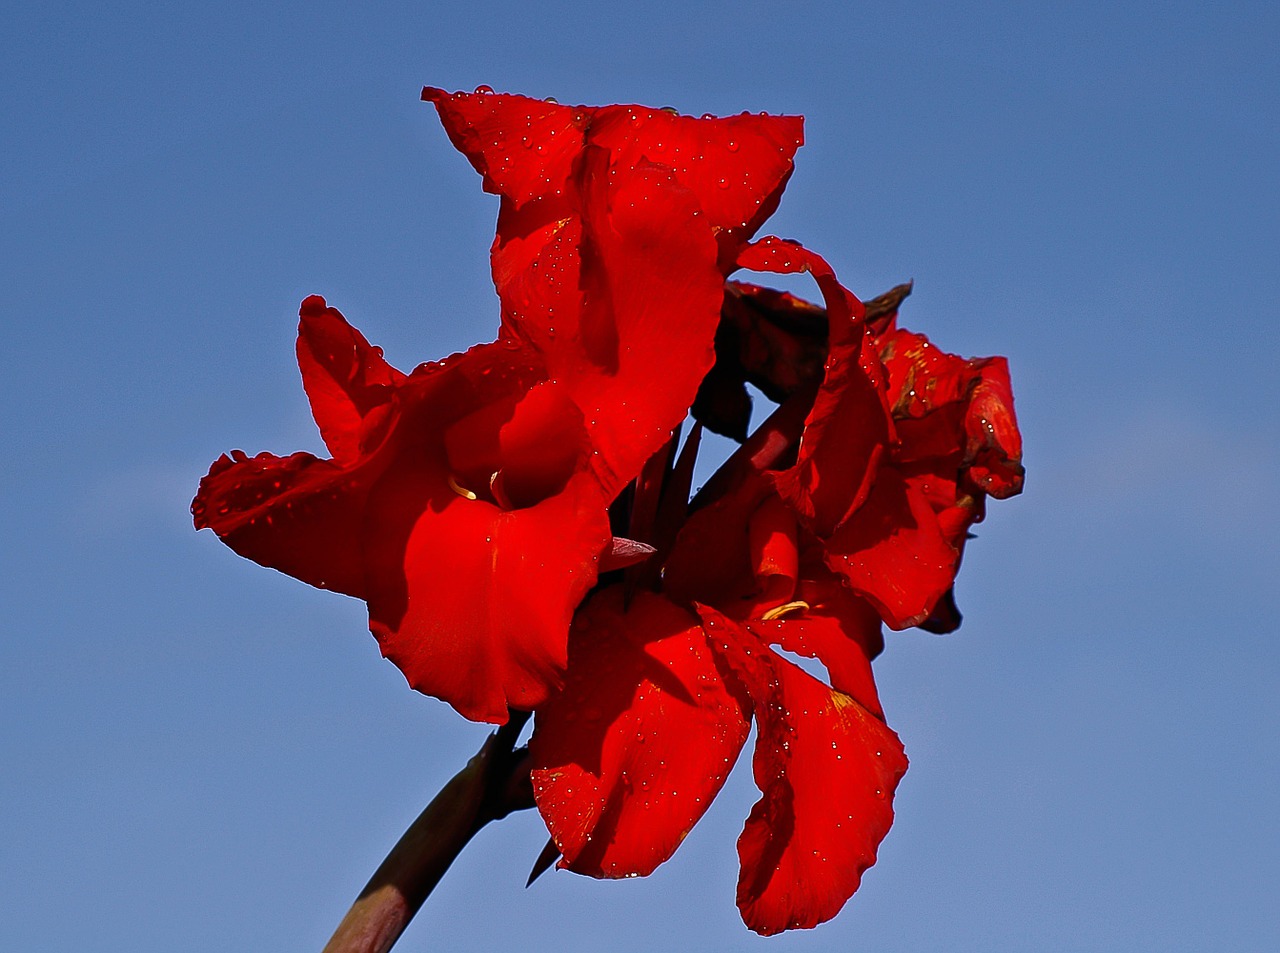 canna lily flower bloom free photo